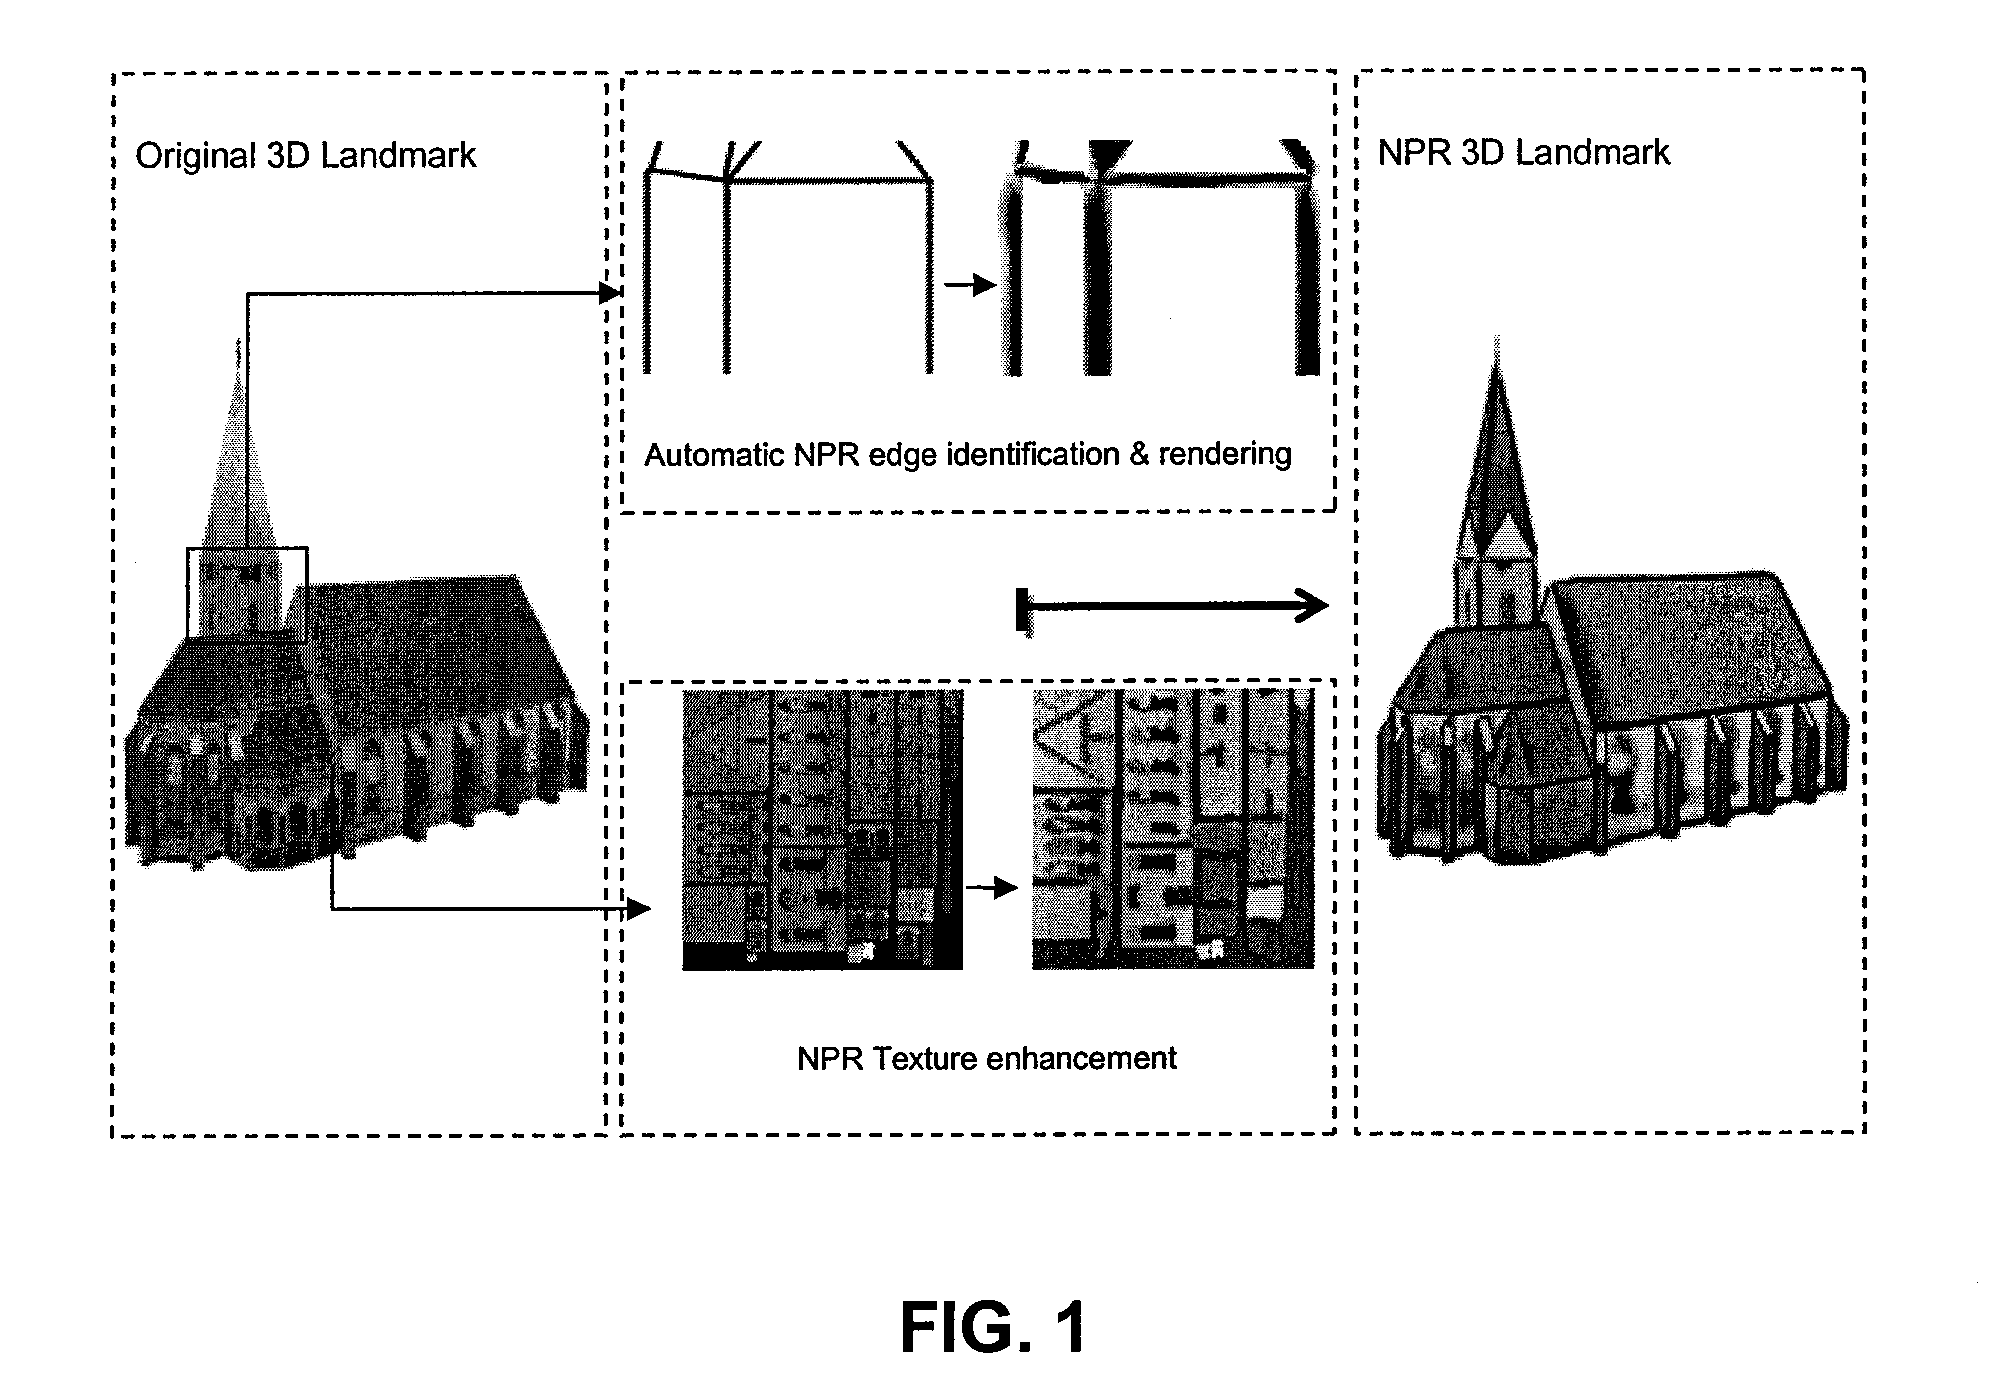 Method for re-using photorealistic 3D landmarks for nonphotorealistic 3D maps